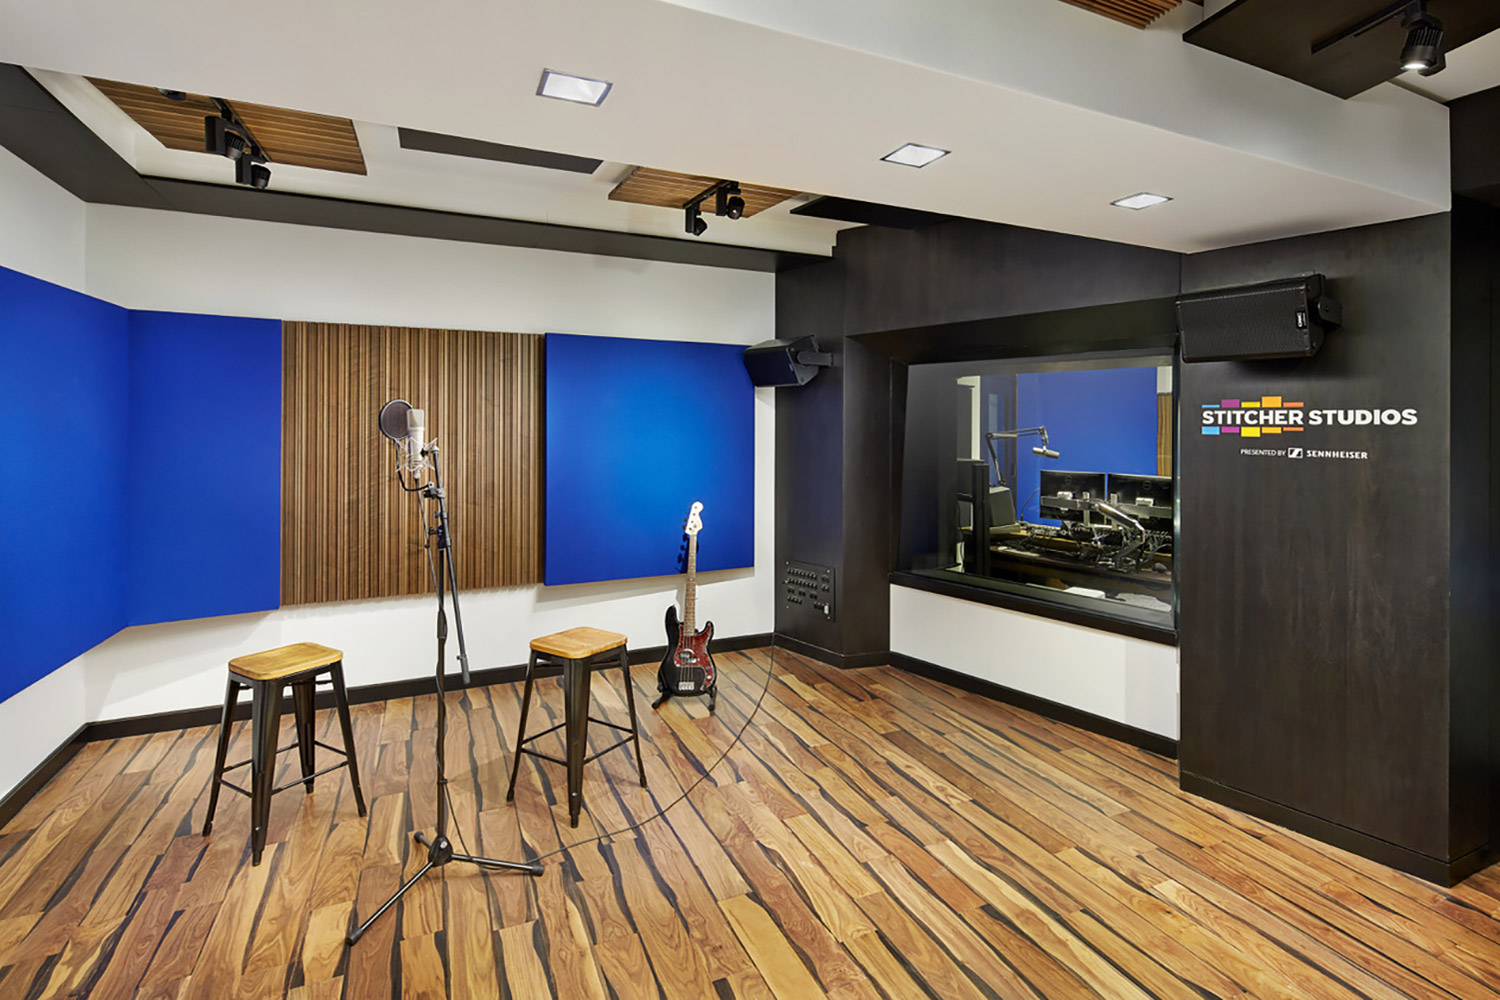 Stitcher is among the earliest, the most creative and most successful podcast creator companies. Their team made a move to build out larger production facilities in both its NY and LA offices and they chose WSDG to design their new podcast studios facilities. Studio A.